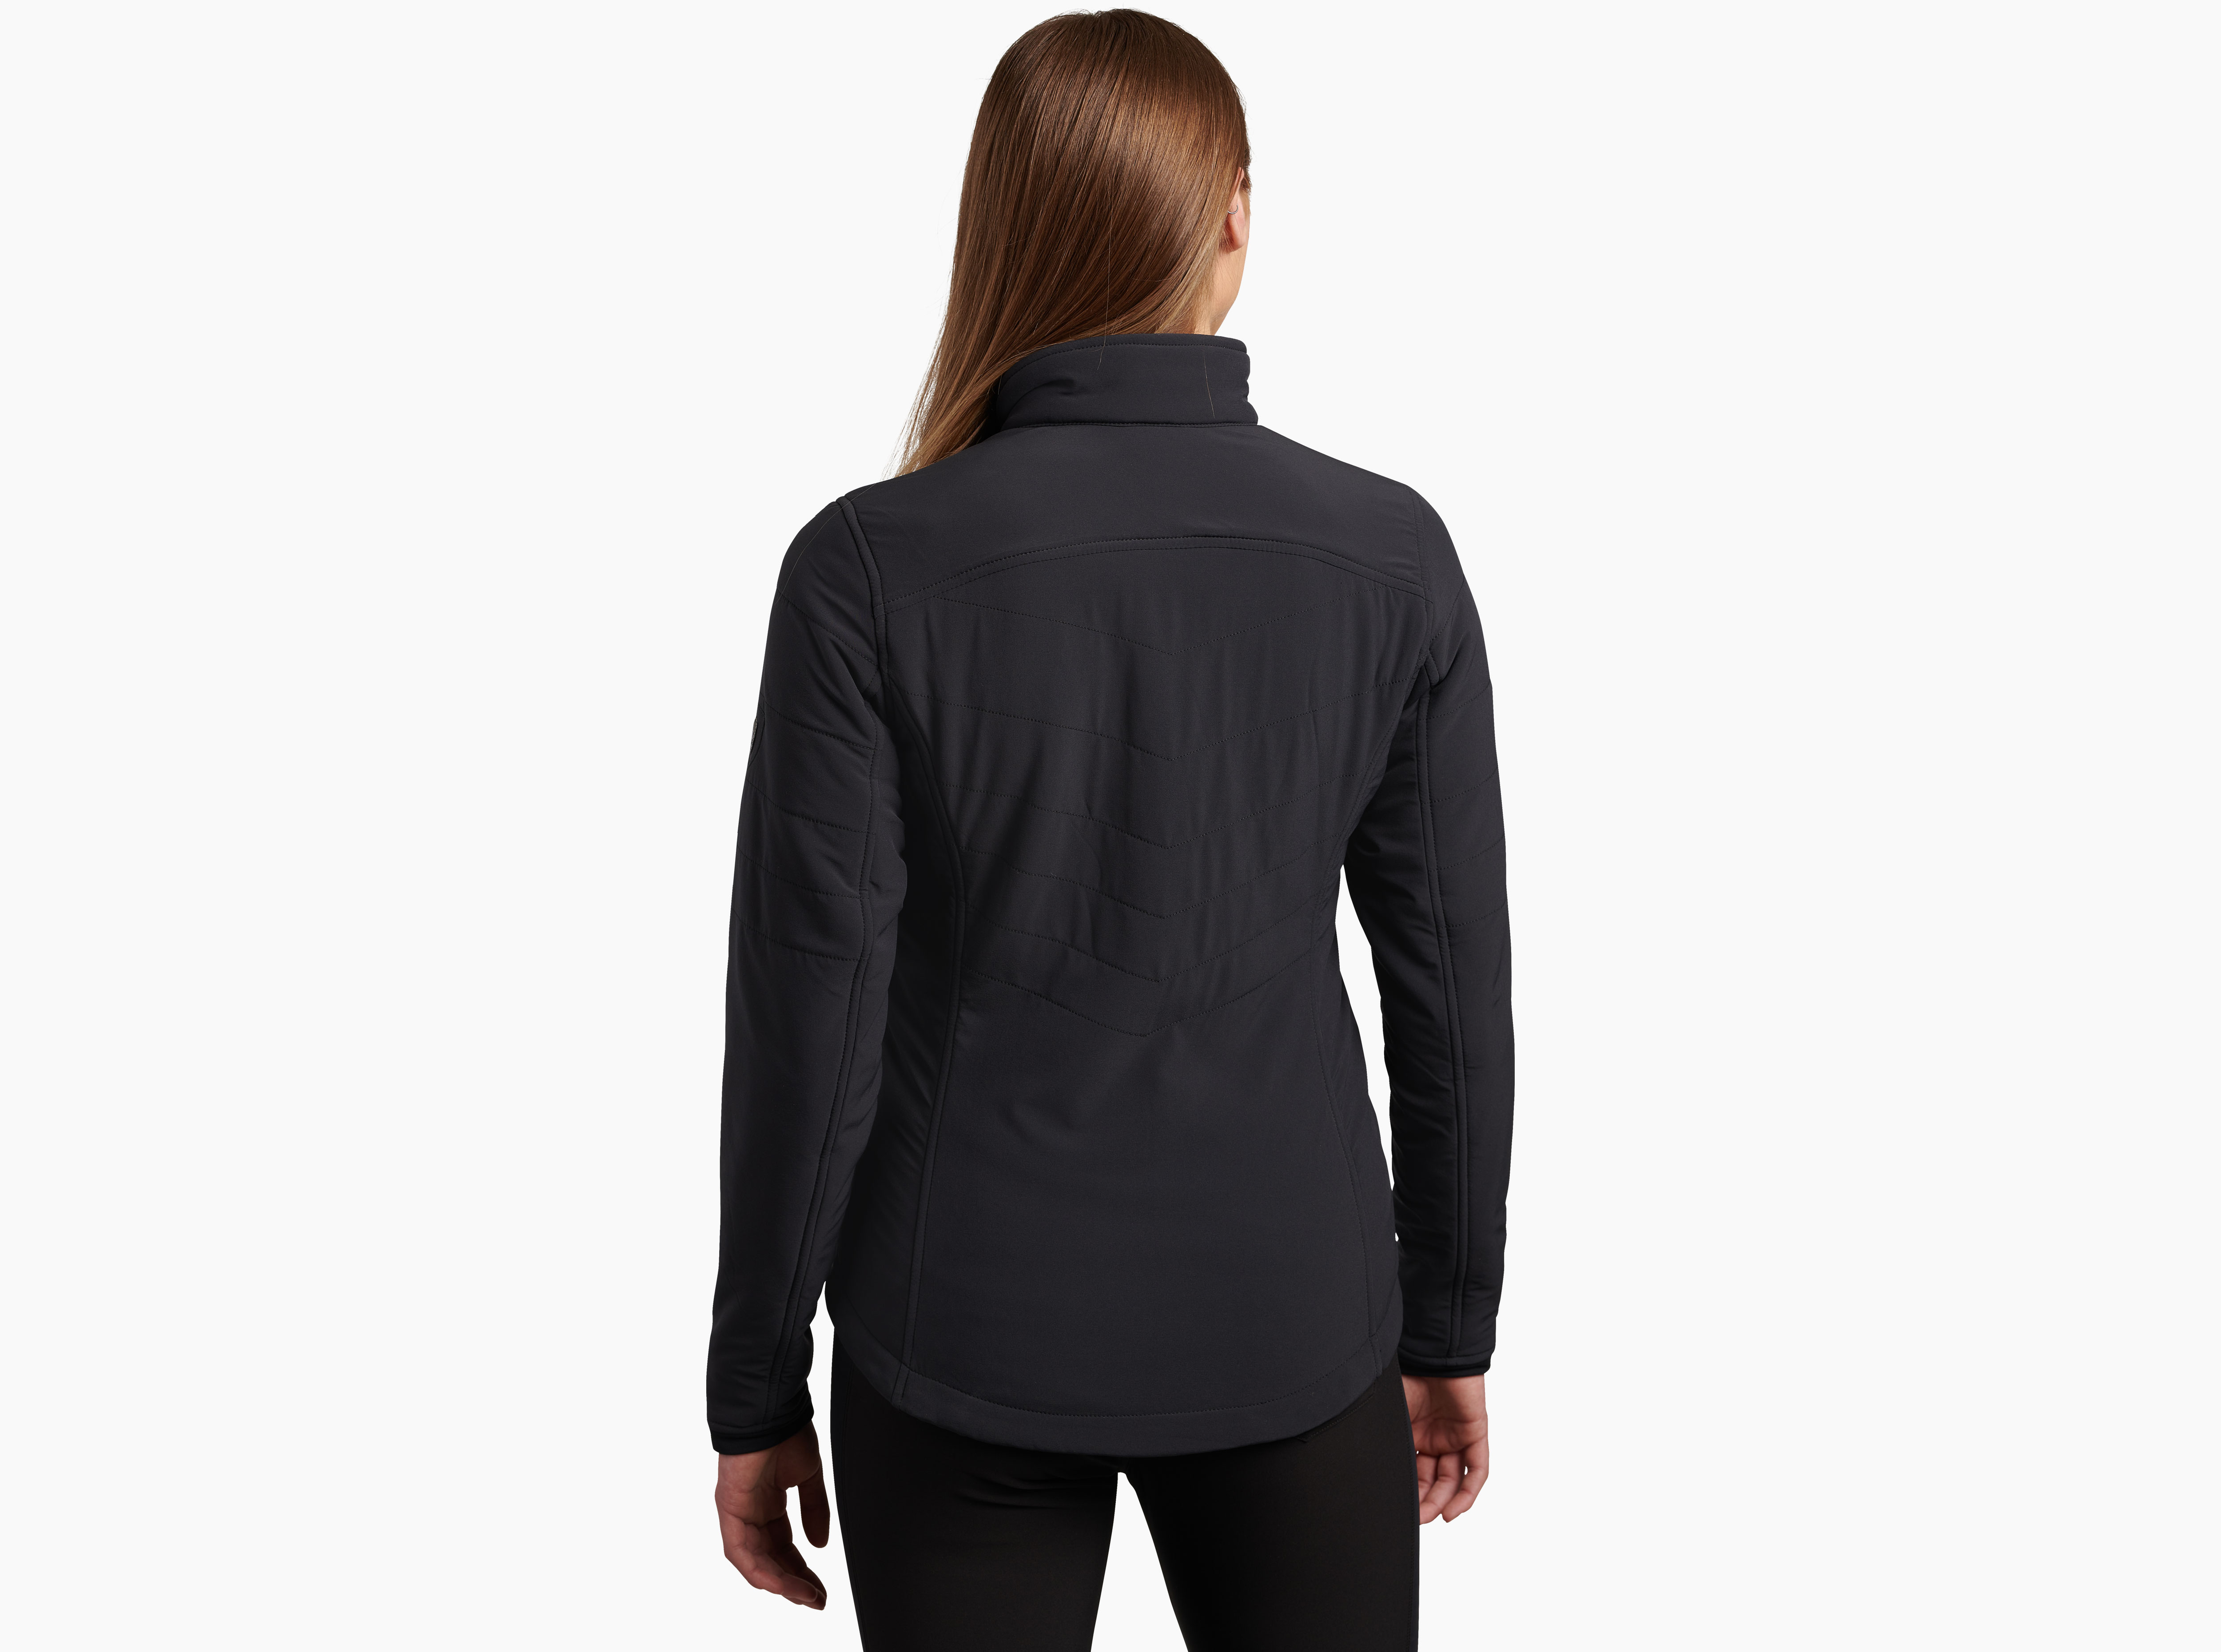 RuggedOutdoors - The KÜHl Fleece Lined Luna Jacket features wind and  water-resistant fabric and high-pile Italian fleece lining to give you a  flexible jacket you can throw on all year long! Get